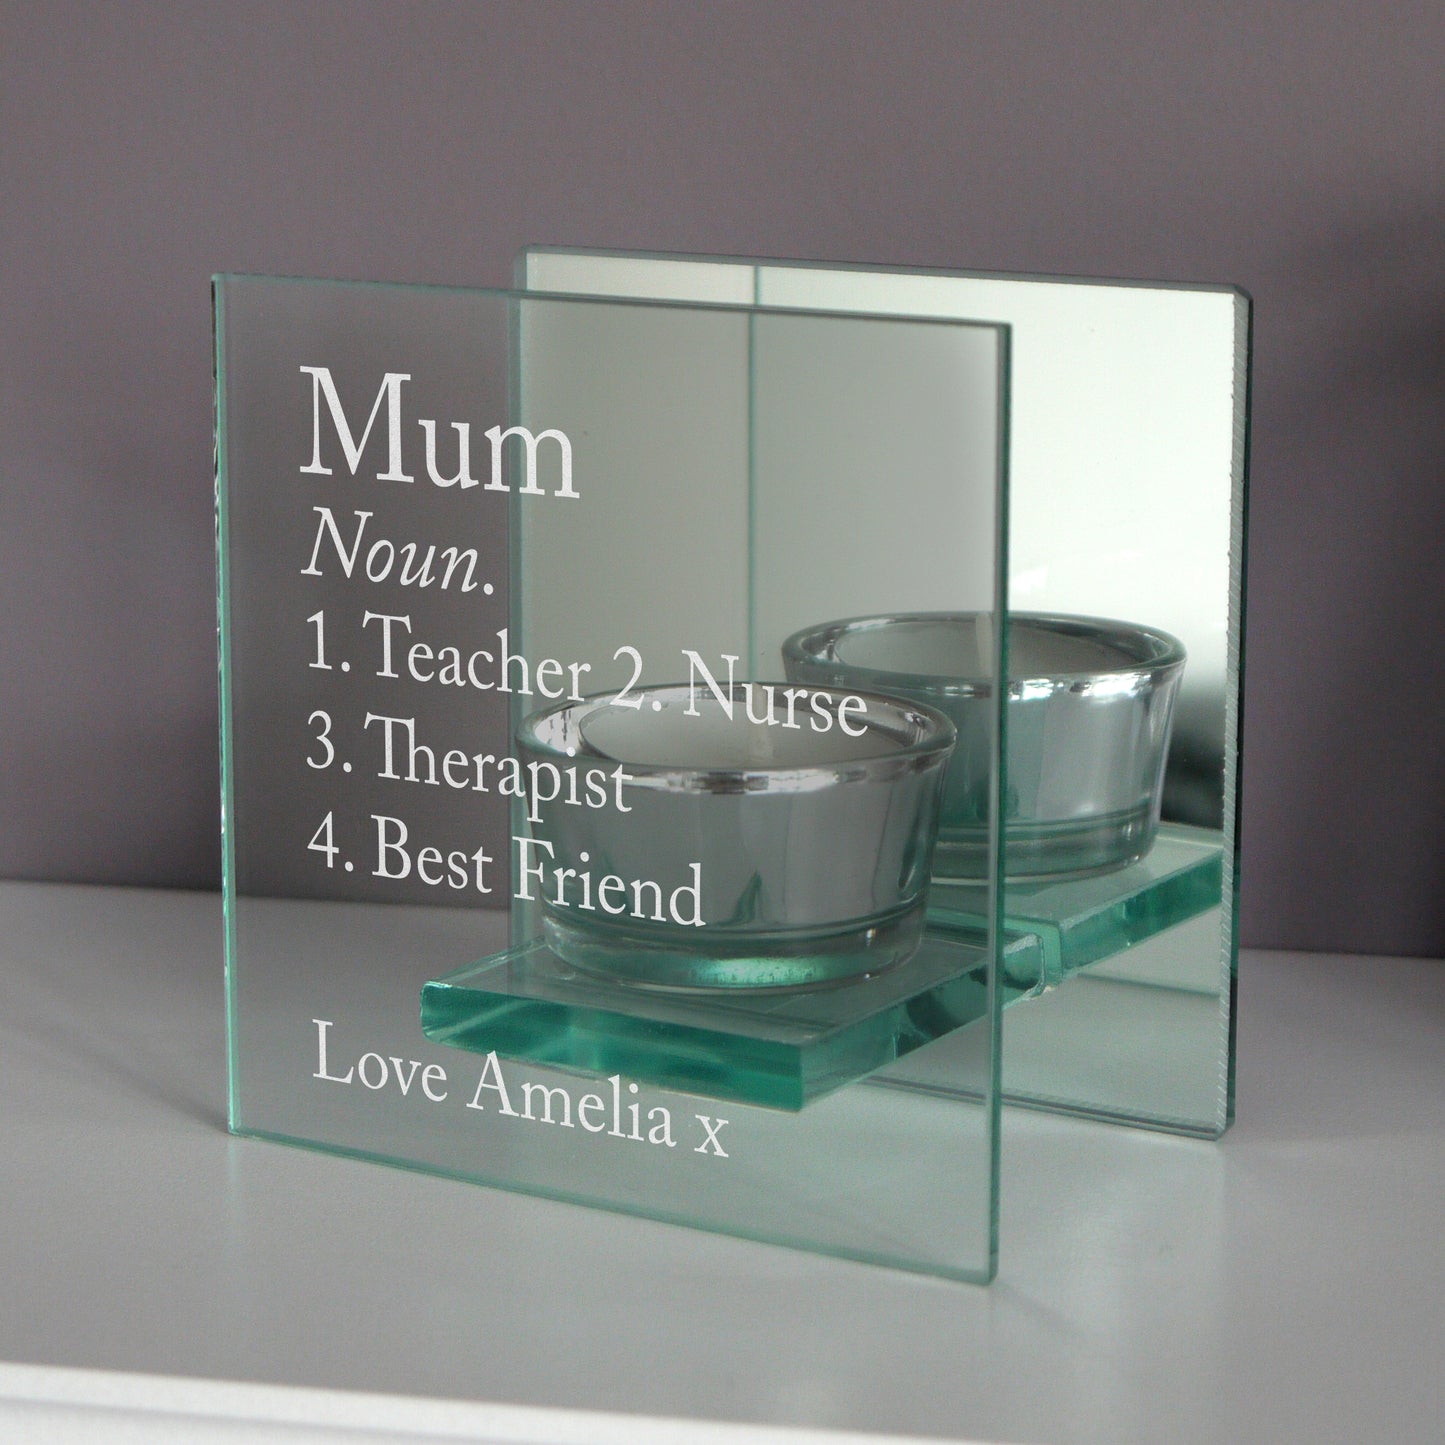 Personalised Definition Mirrored Glass Tea Light Candle Holder - Personalise It!